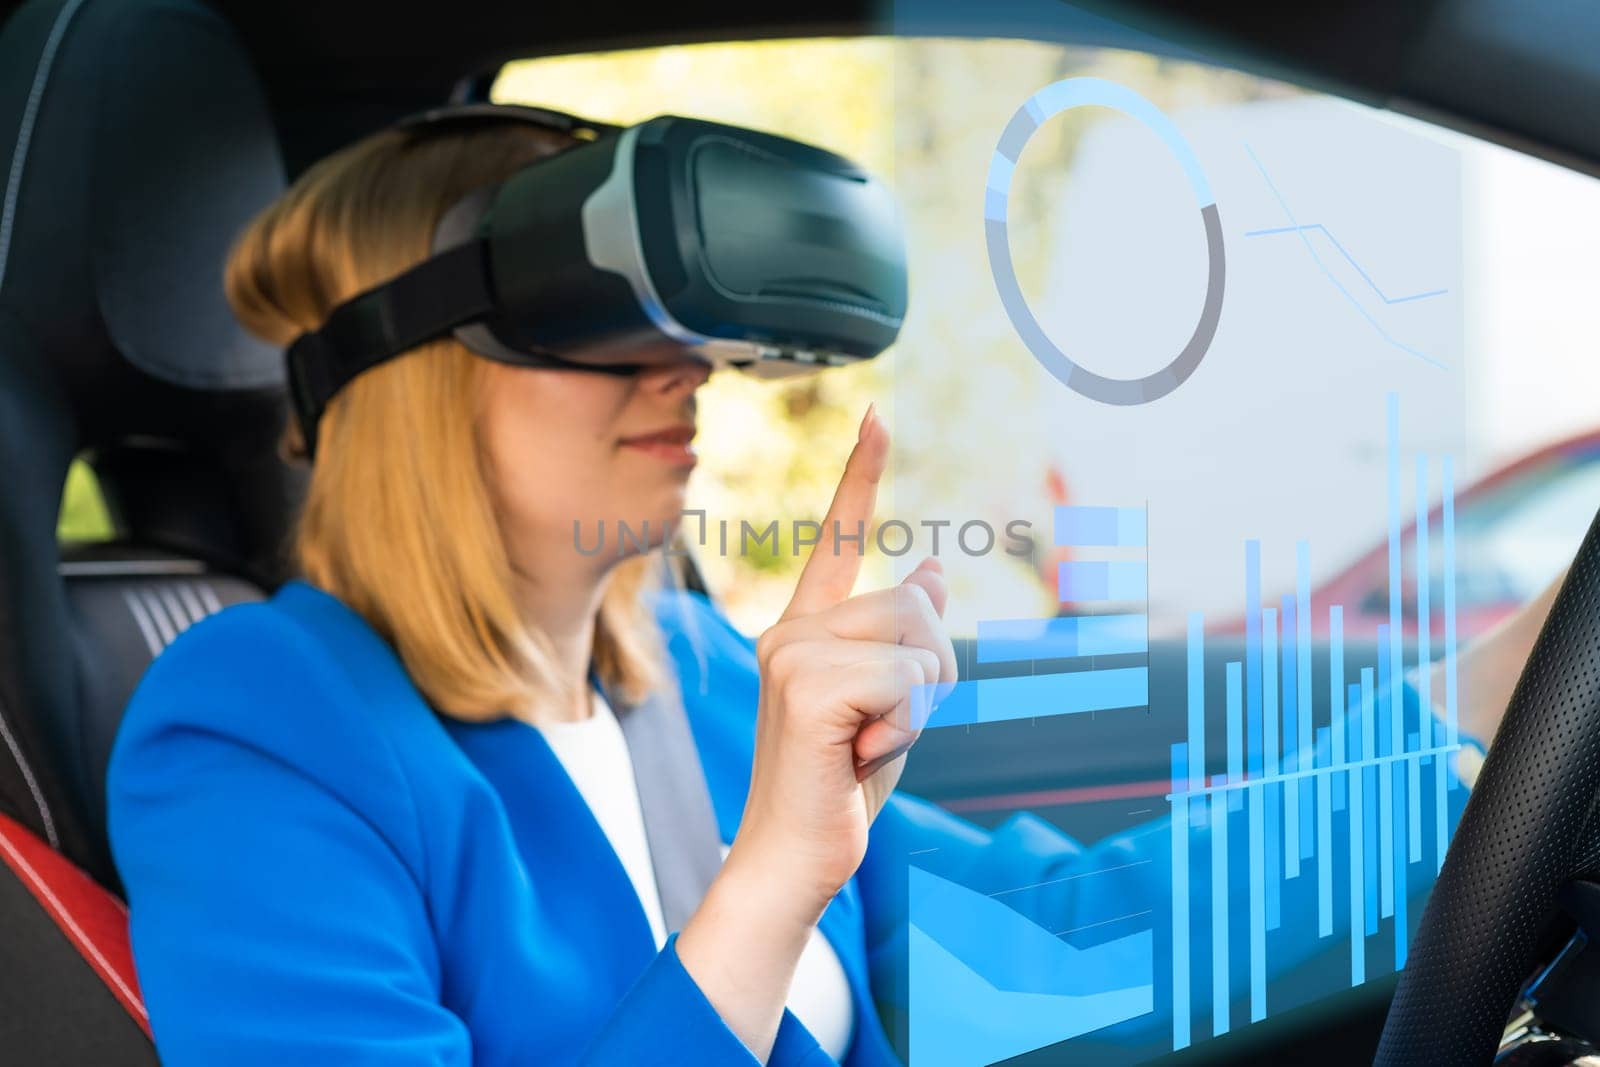 Digitally generated graphics and charts interface managed by business woman in vr googles sitting in the car in a blue suit by vladimka